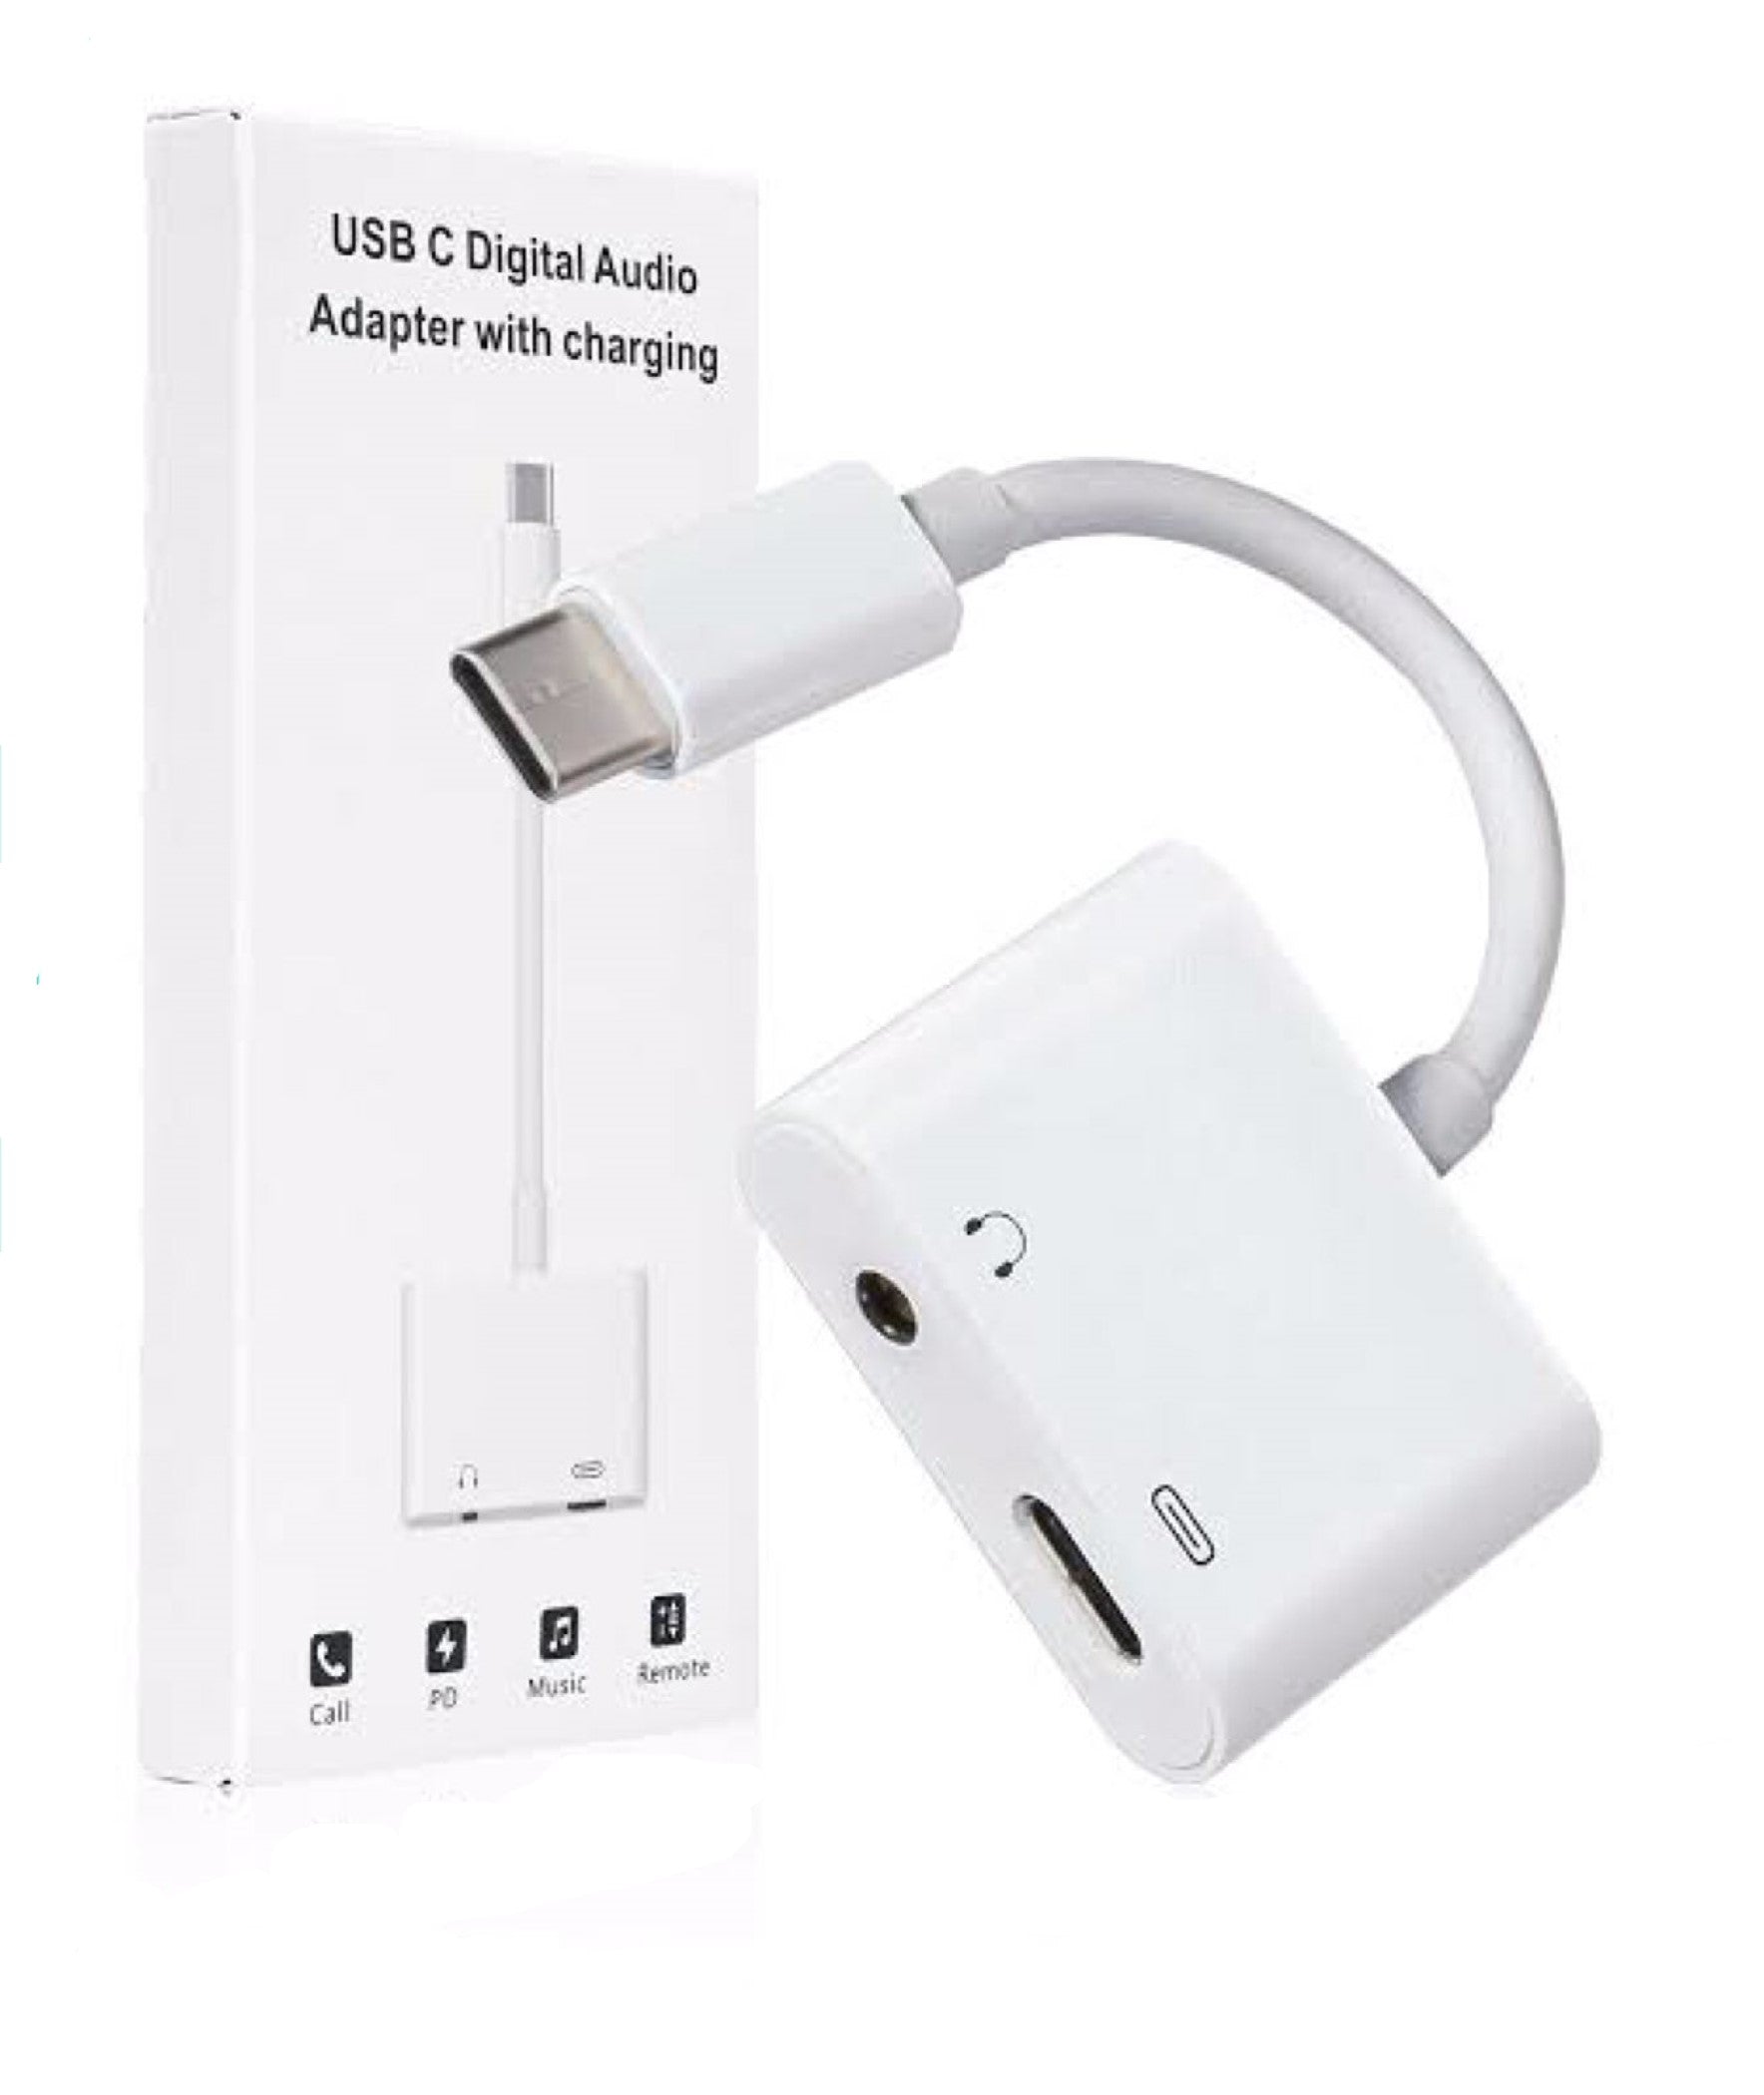 JBL Flip 5 using USB C to AUX adapter] is it possible to use a adapter like  in the image to play music with an AUX cord? : r/UsbCHardware